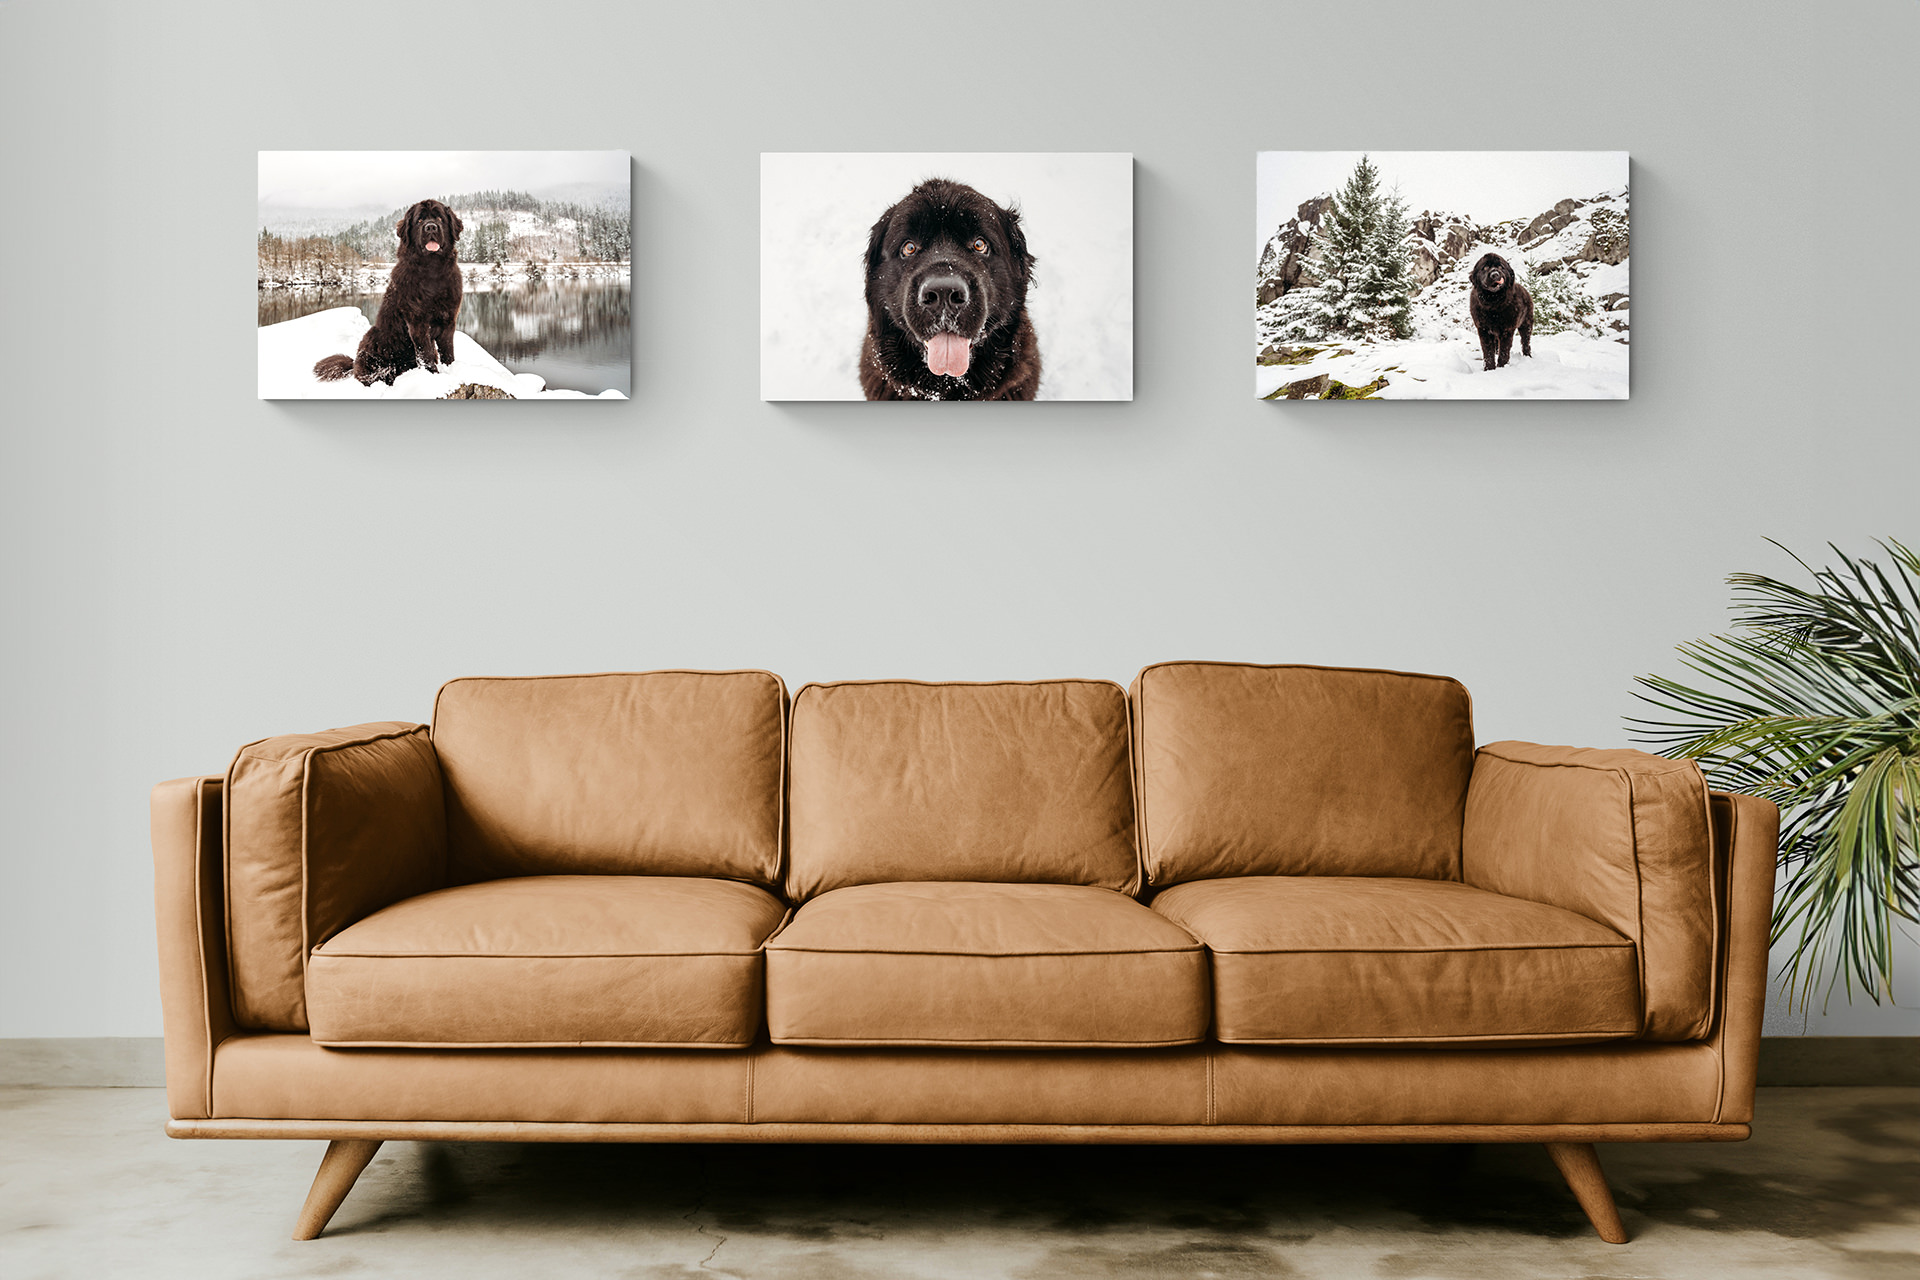 Dog portraits above modern tan leather couch in room.